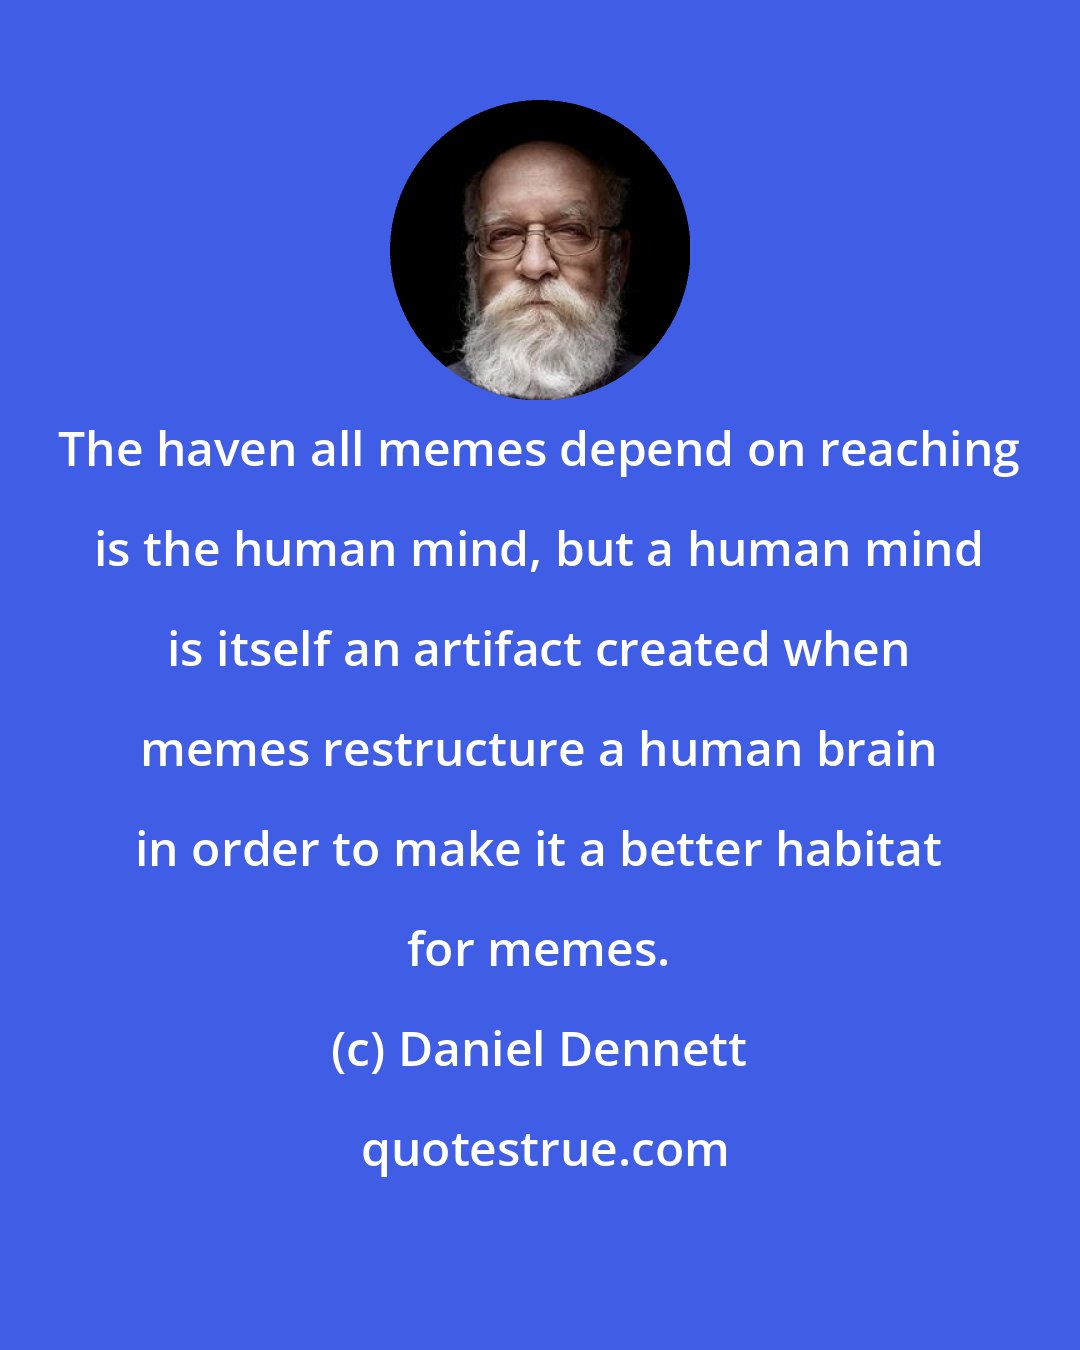 Daniel Dennett: The haven all memes depend on reaching is the human mind, but a human mind is itself an artifact created when memes restructure a human brain in order to make it a better habitat for memes.